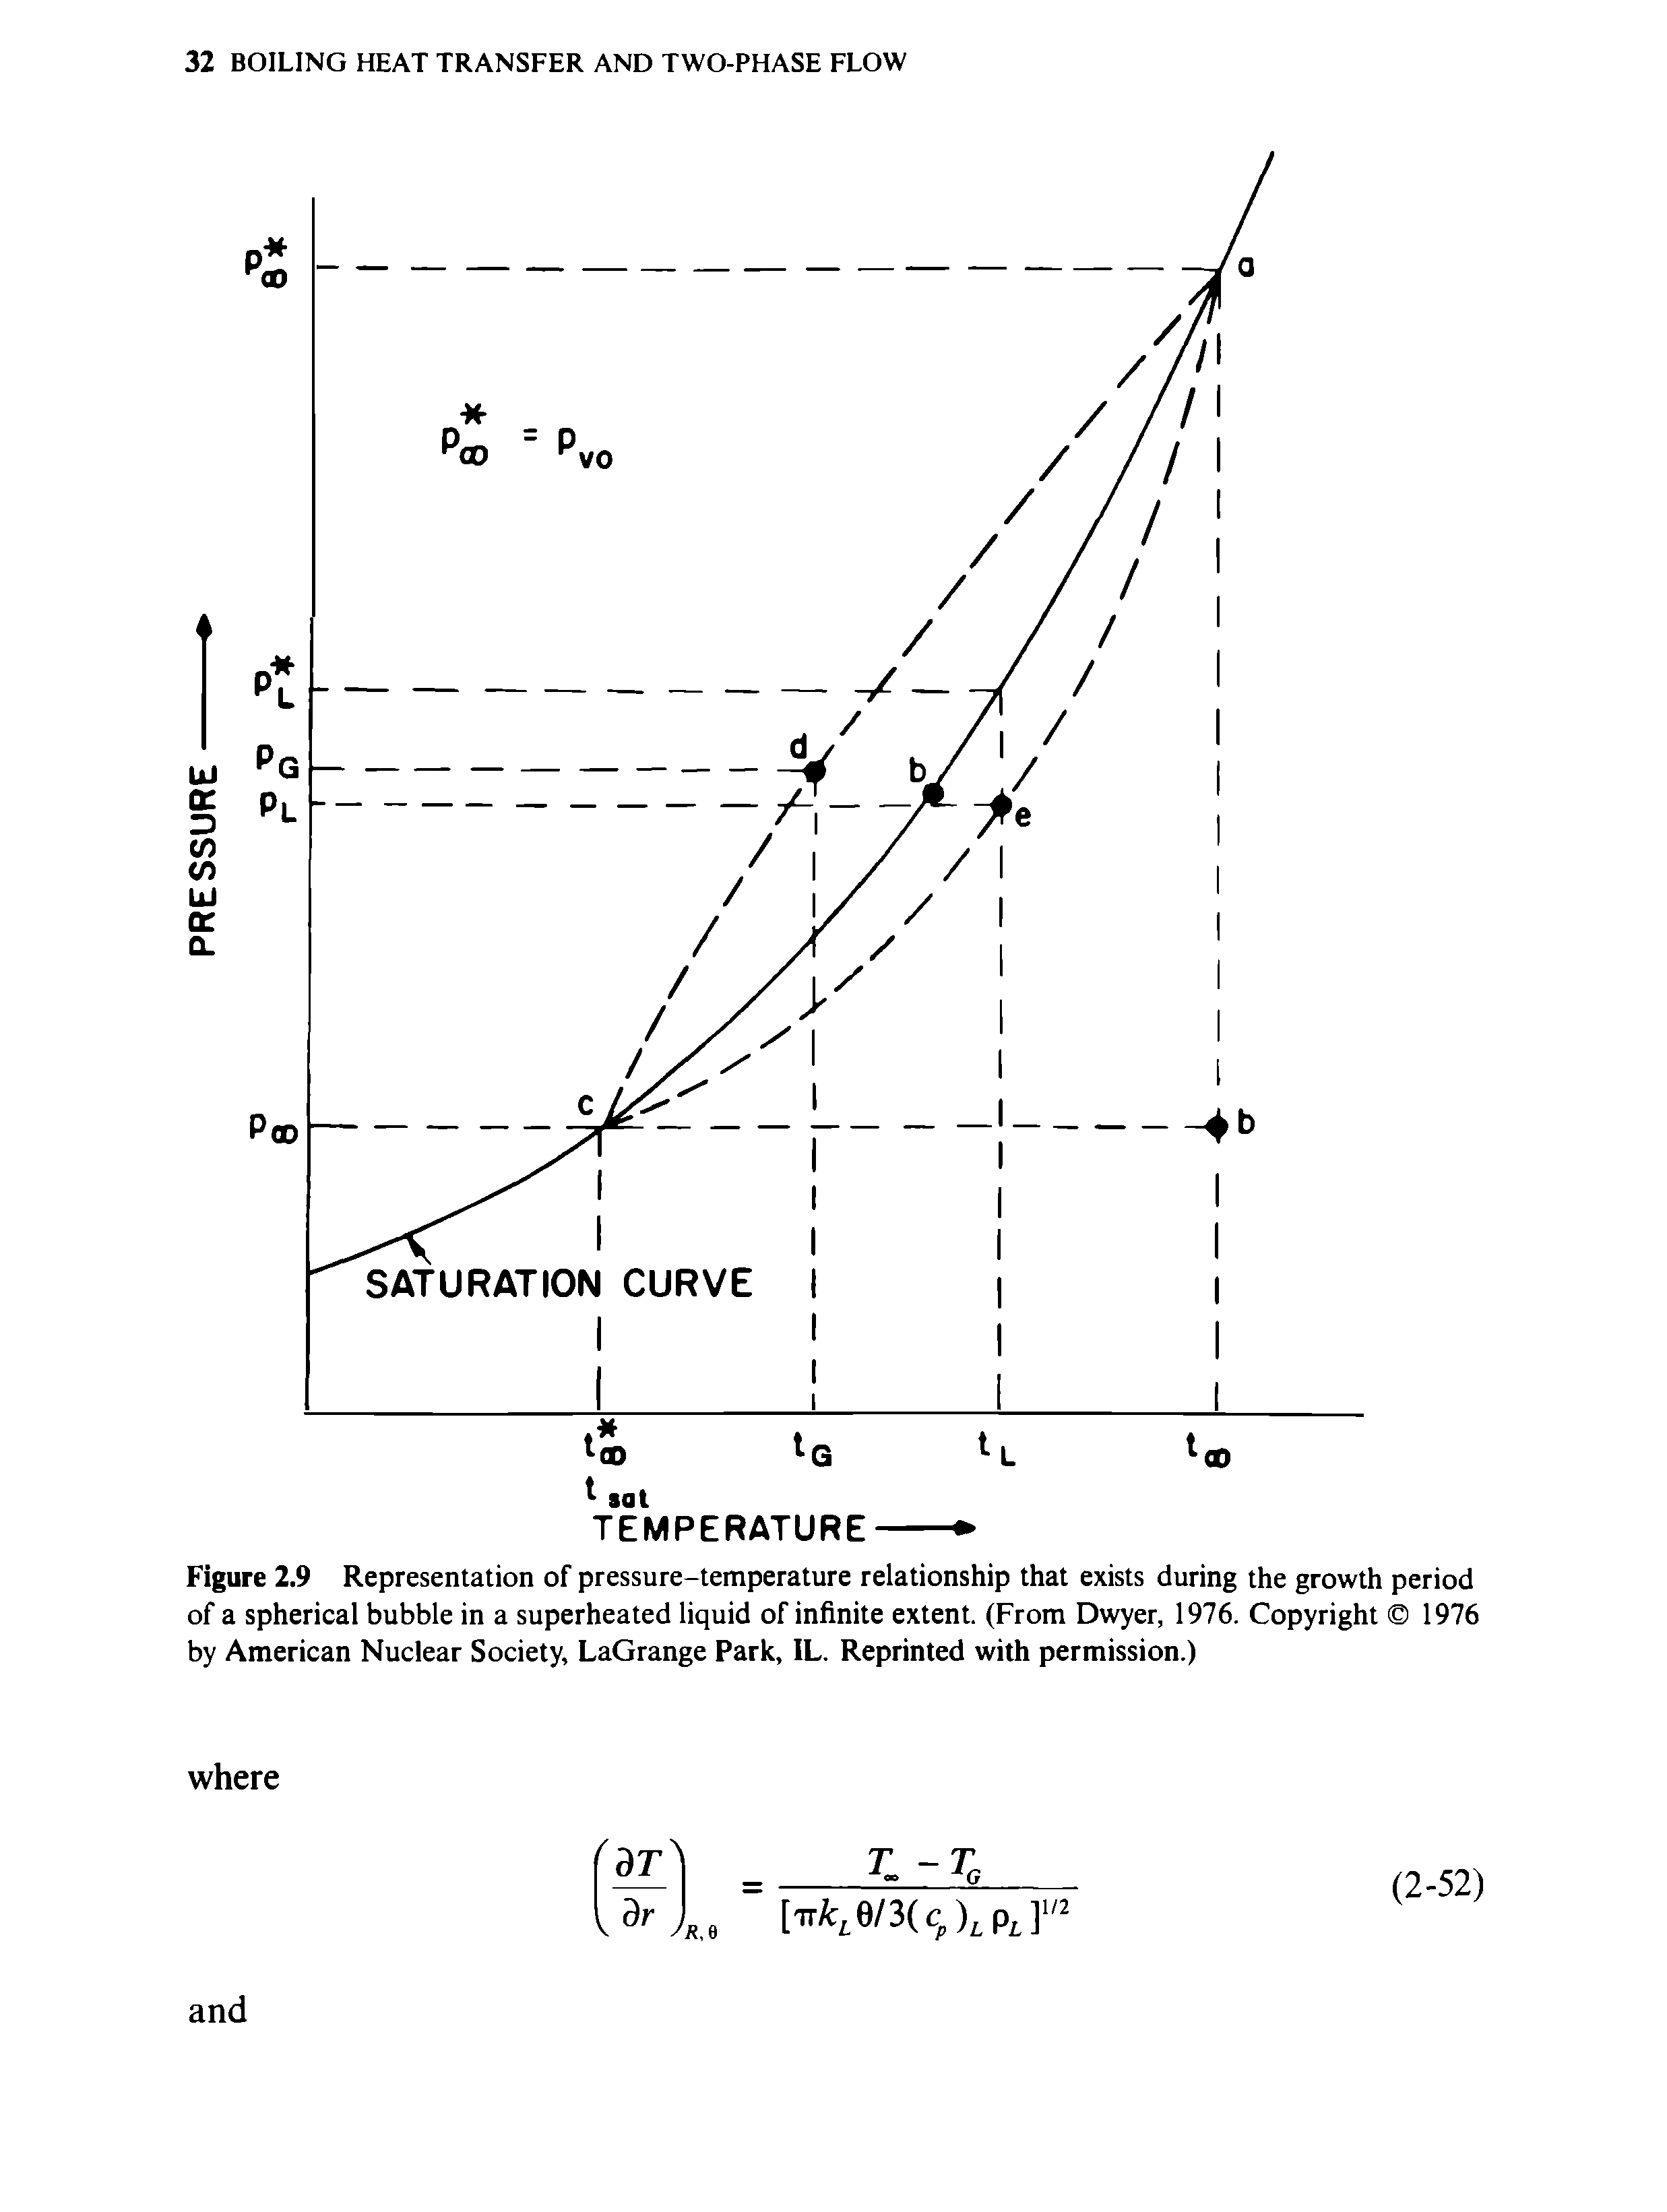 Figure 2.9 Representation of pressure-temperature relationship that exists during the growth period of a spherical bubble in a superheated liquid of infinite extent. (From Dwyer, 1976. Copyright 1976 by American Nuclear Society, LaGrange Park, IL. Reprinted with permission.)...